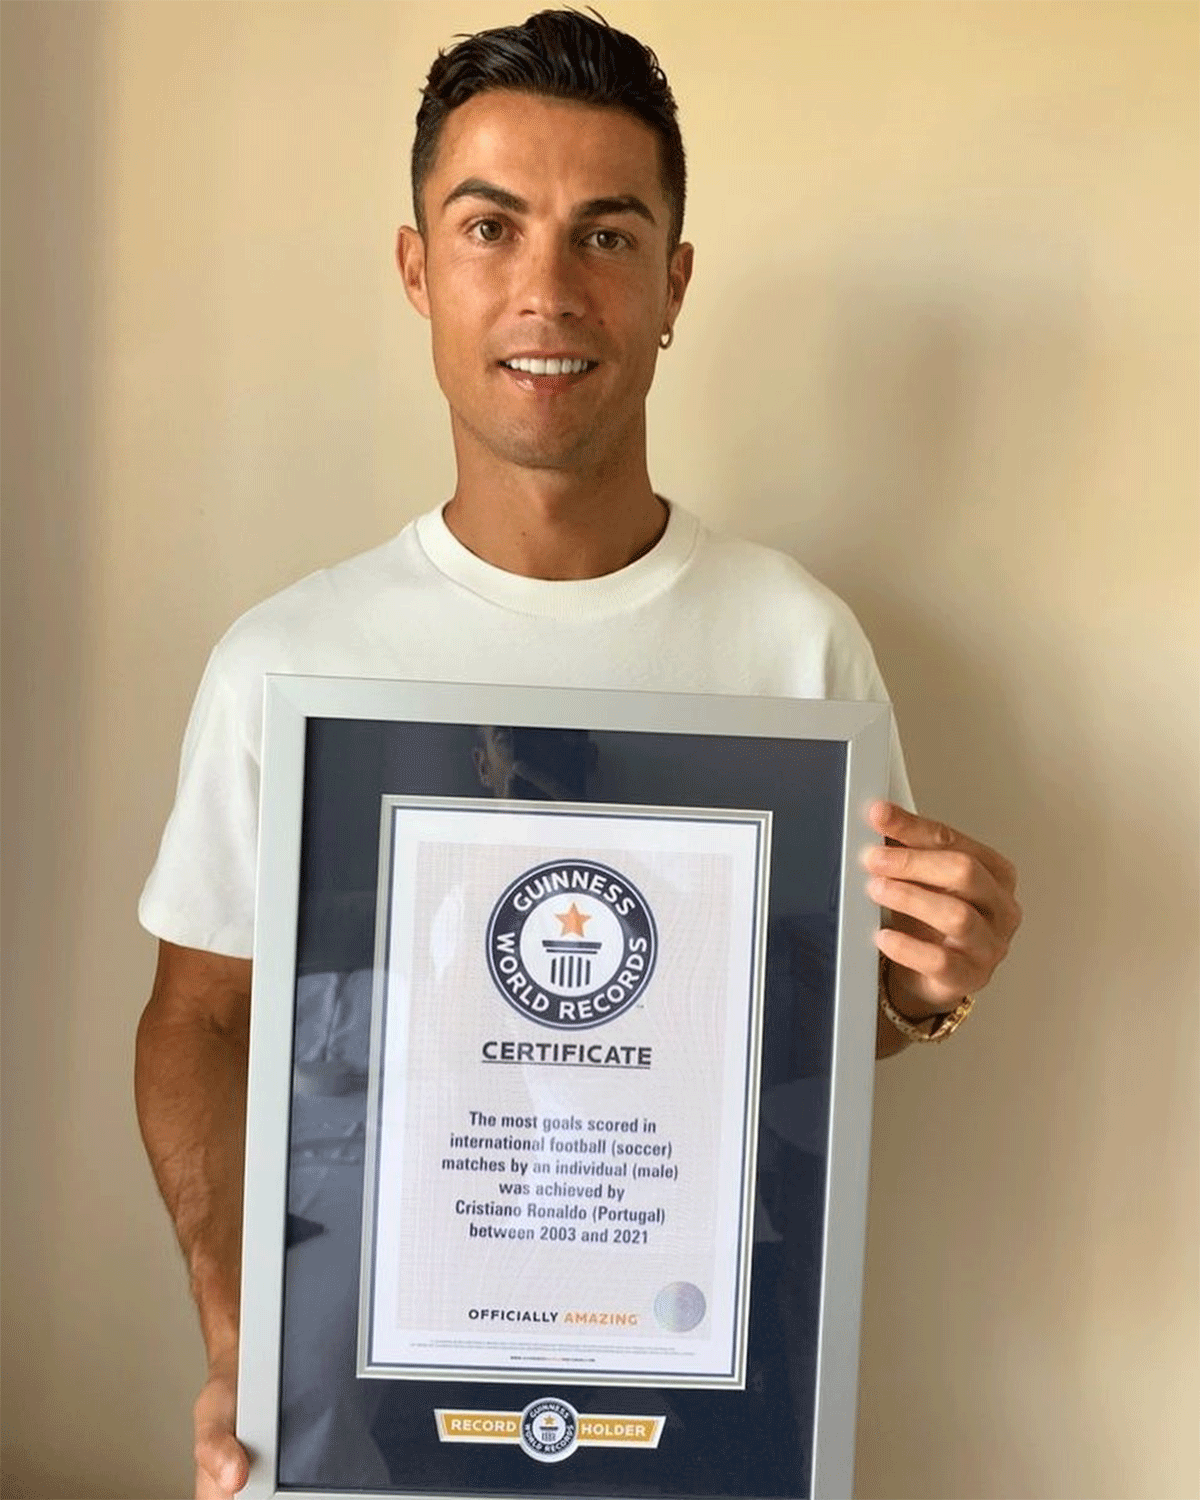 Cristiano Ronaldo with a certificate from the Guiness World Records for scoring most goals in international football, a feat he recorded against Ireland on Wednesday